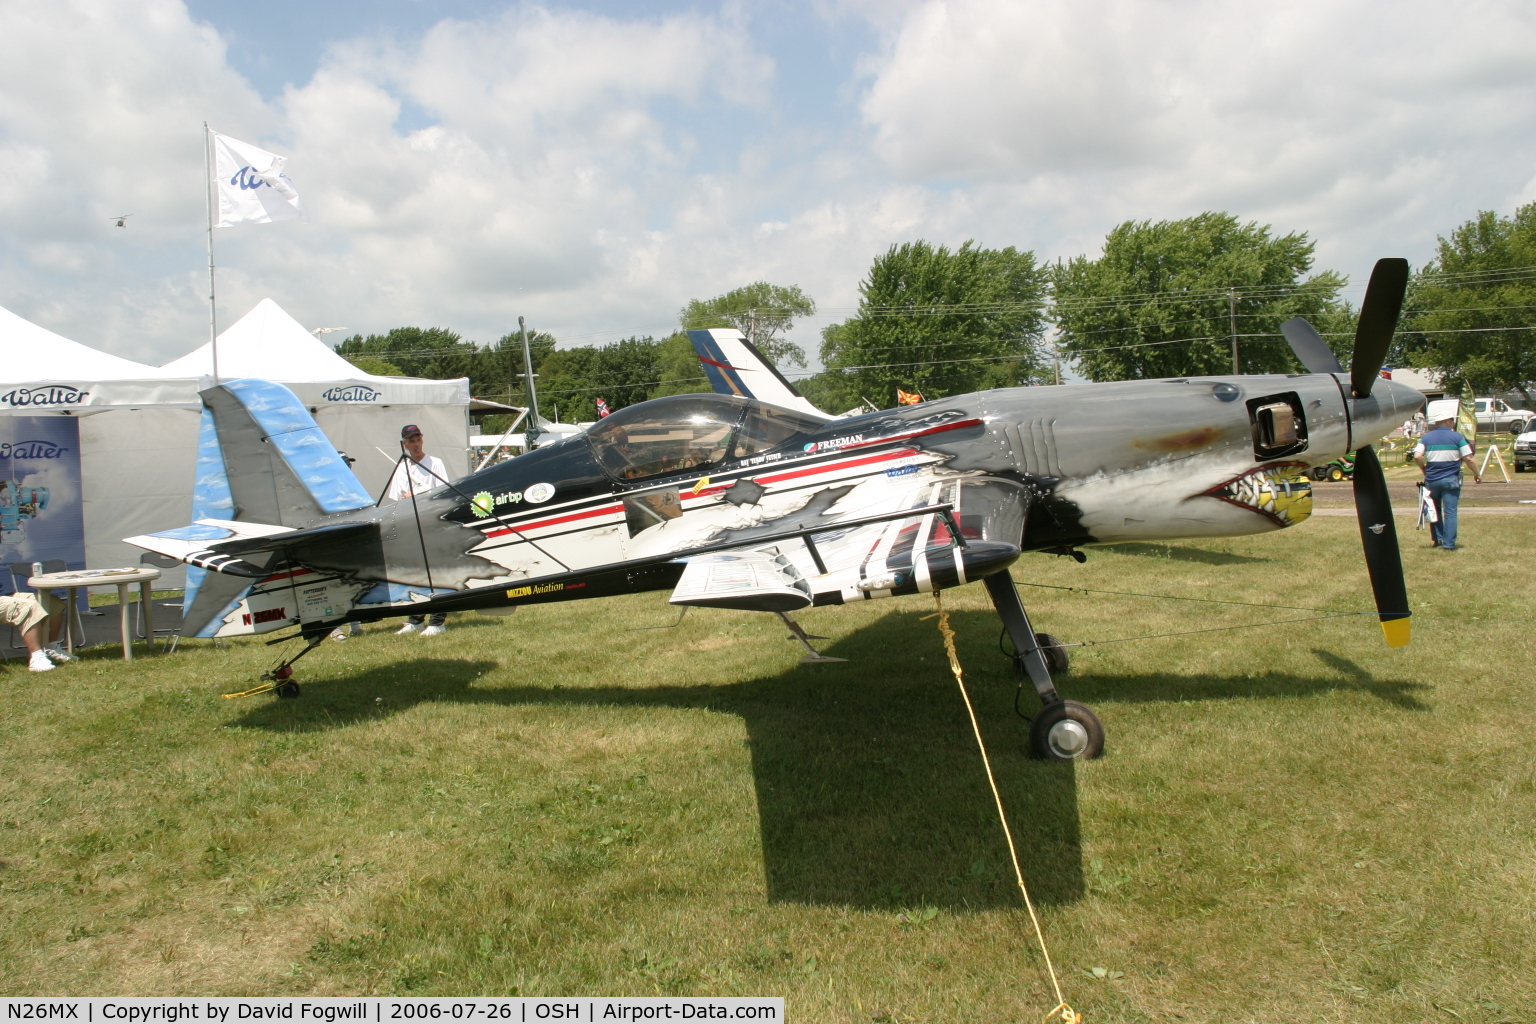 N26MX, 1990 Sukhoi SU-26MX C/N 51-02, Now fitted with a turboprop